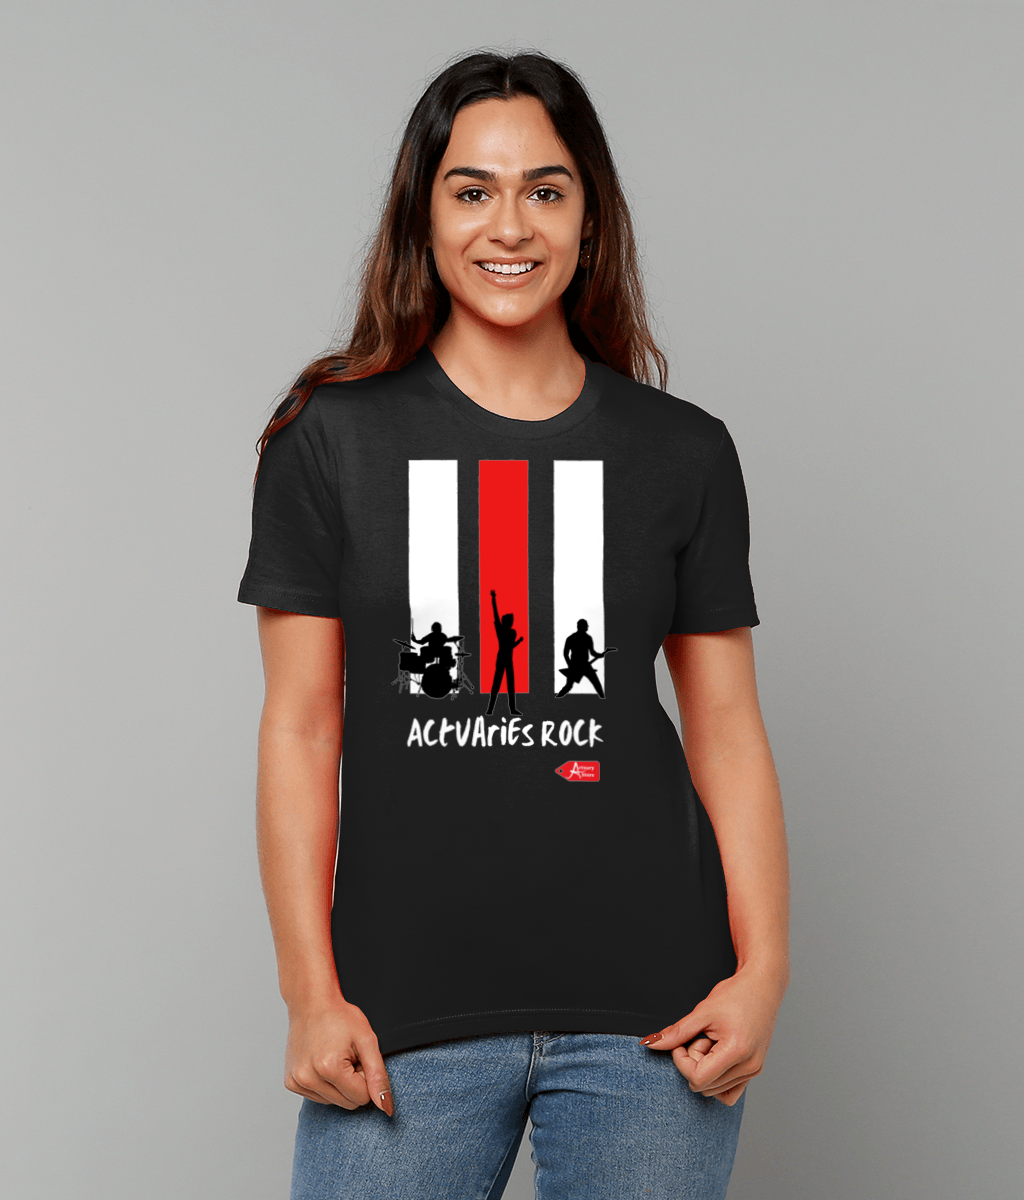 Actuaries Rock Black White and Red Concert Band T-shirt